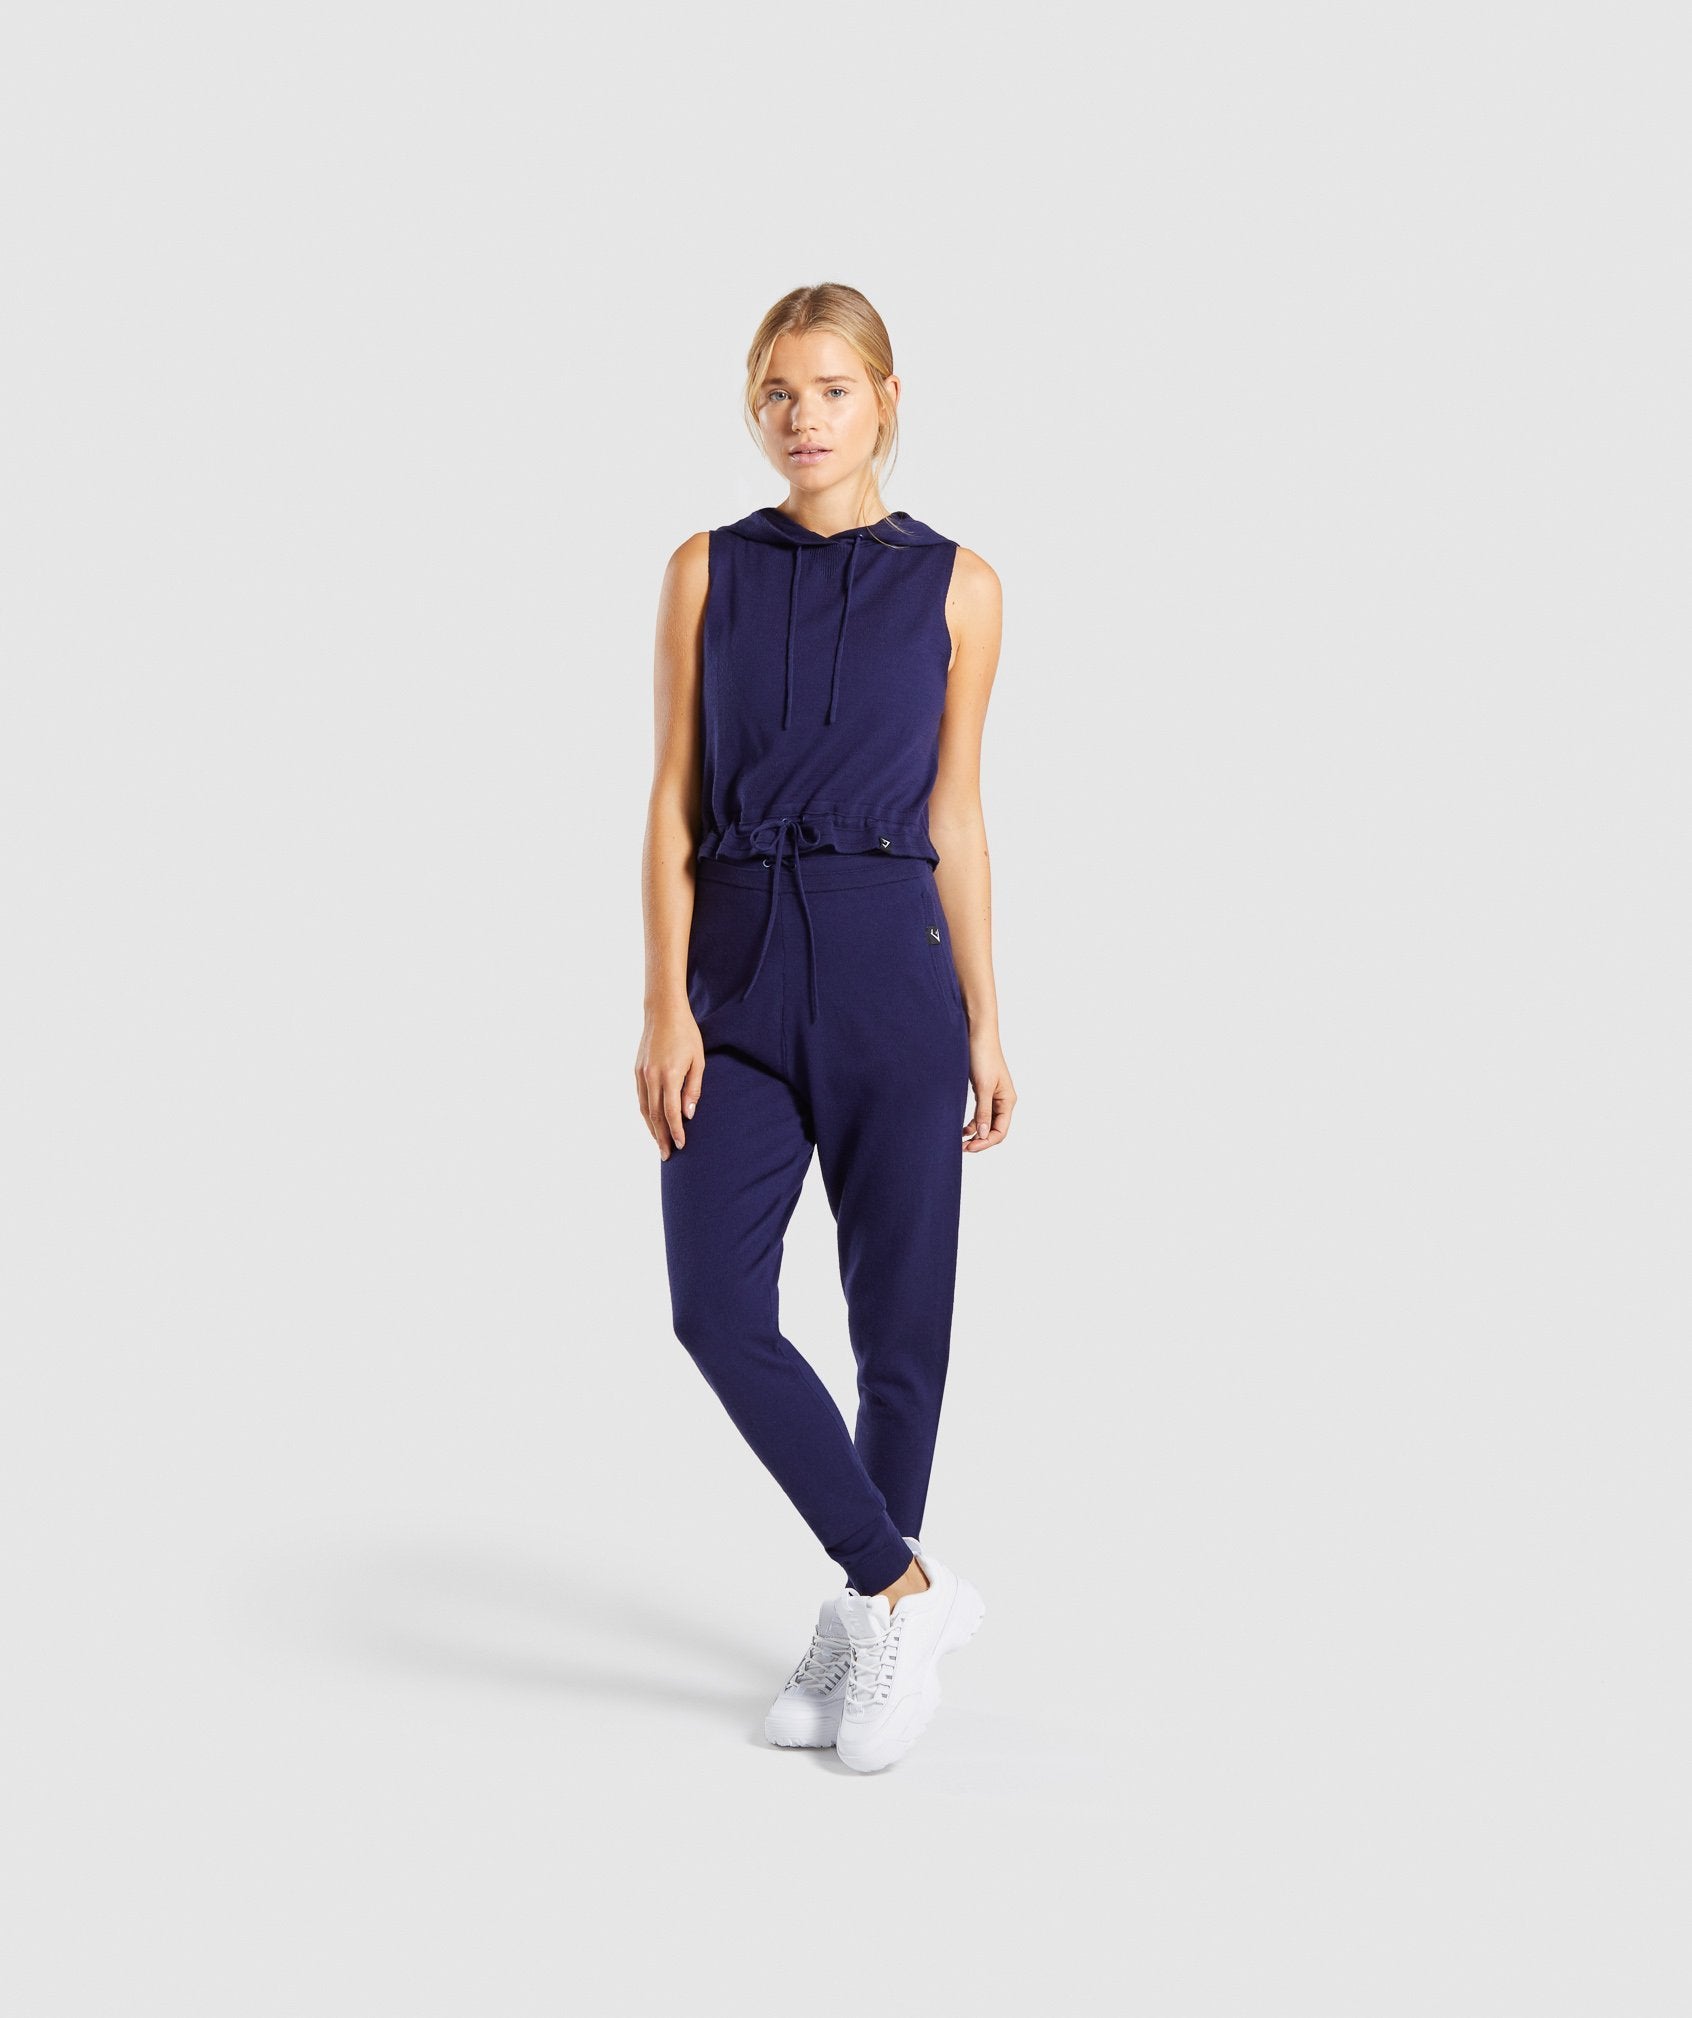 Isla Knit Sleeveless Hoodie in Evening Navy Blue - view 5